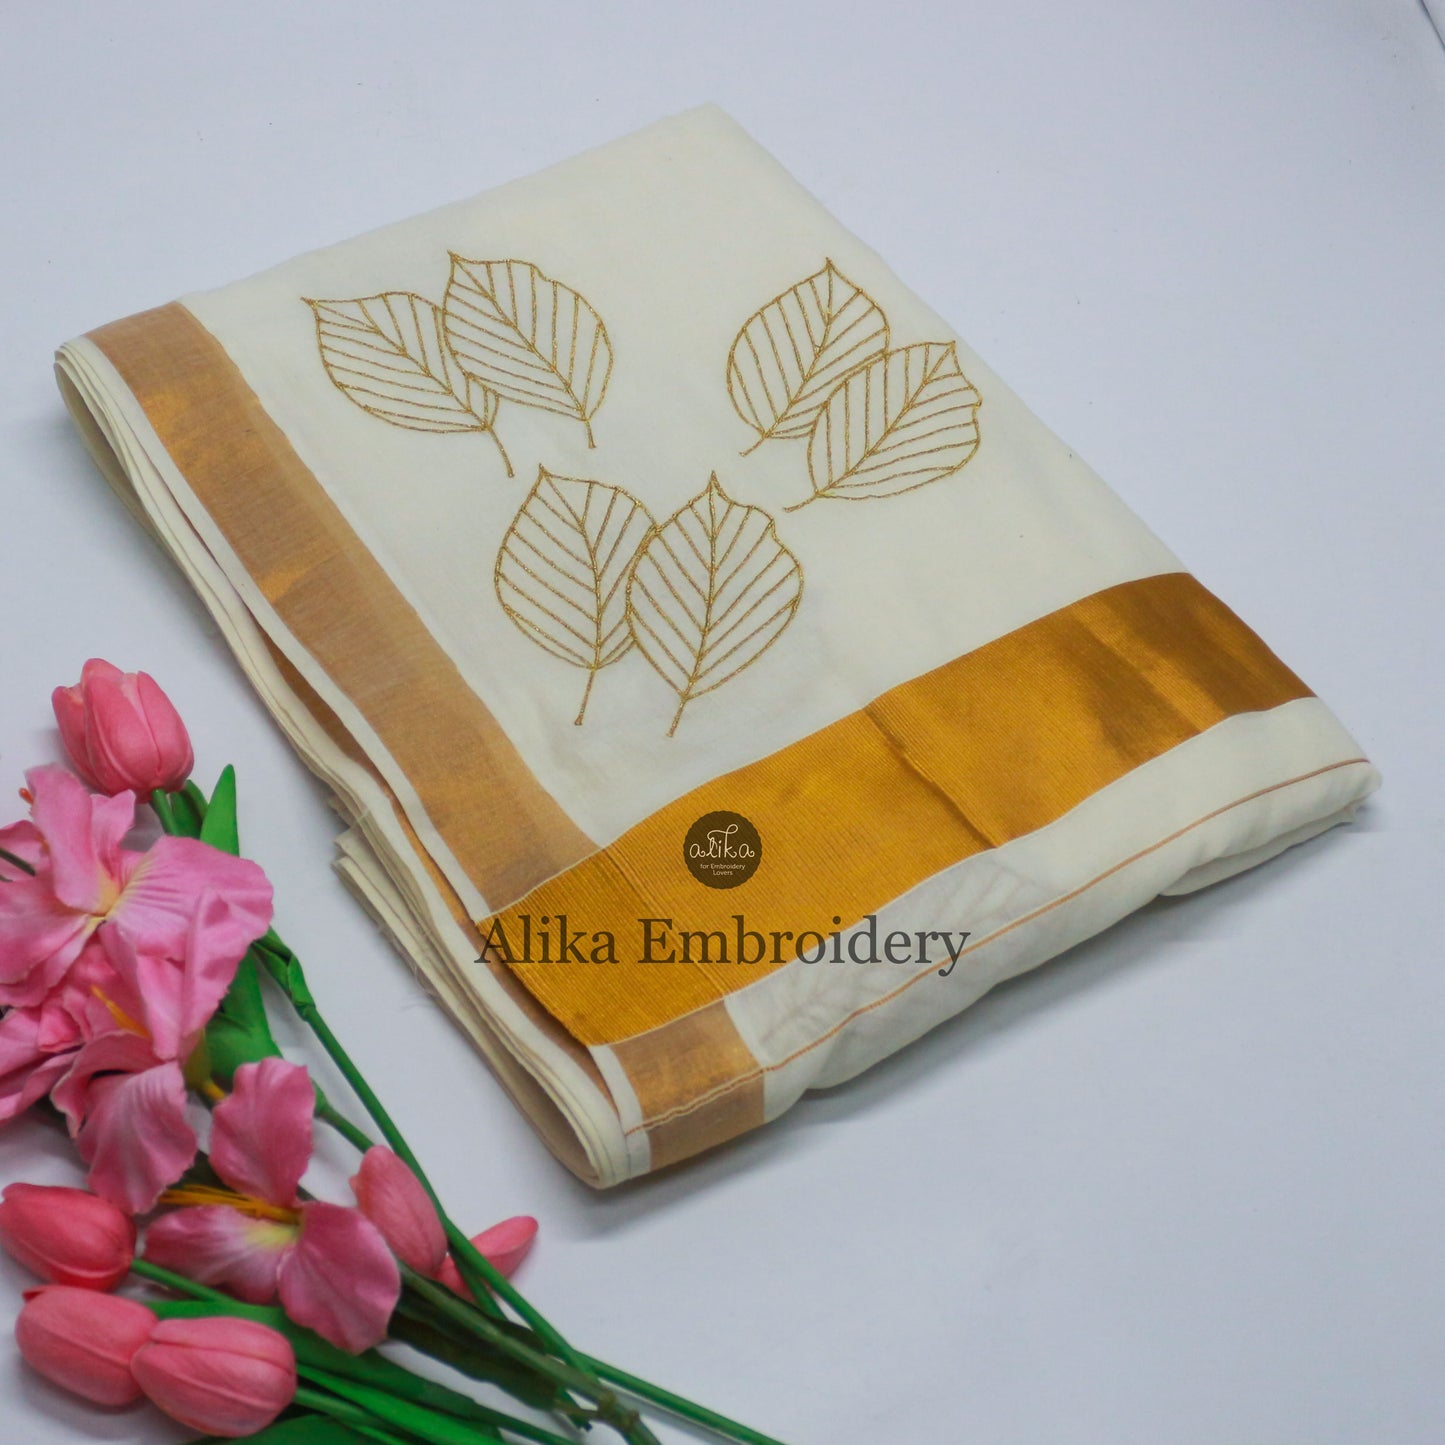 Tradition Meets Elegance: Kerala Kasavu Saree with Exquisite Embroidery